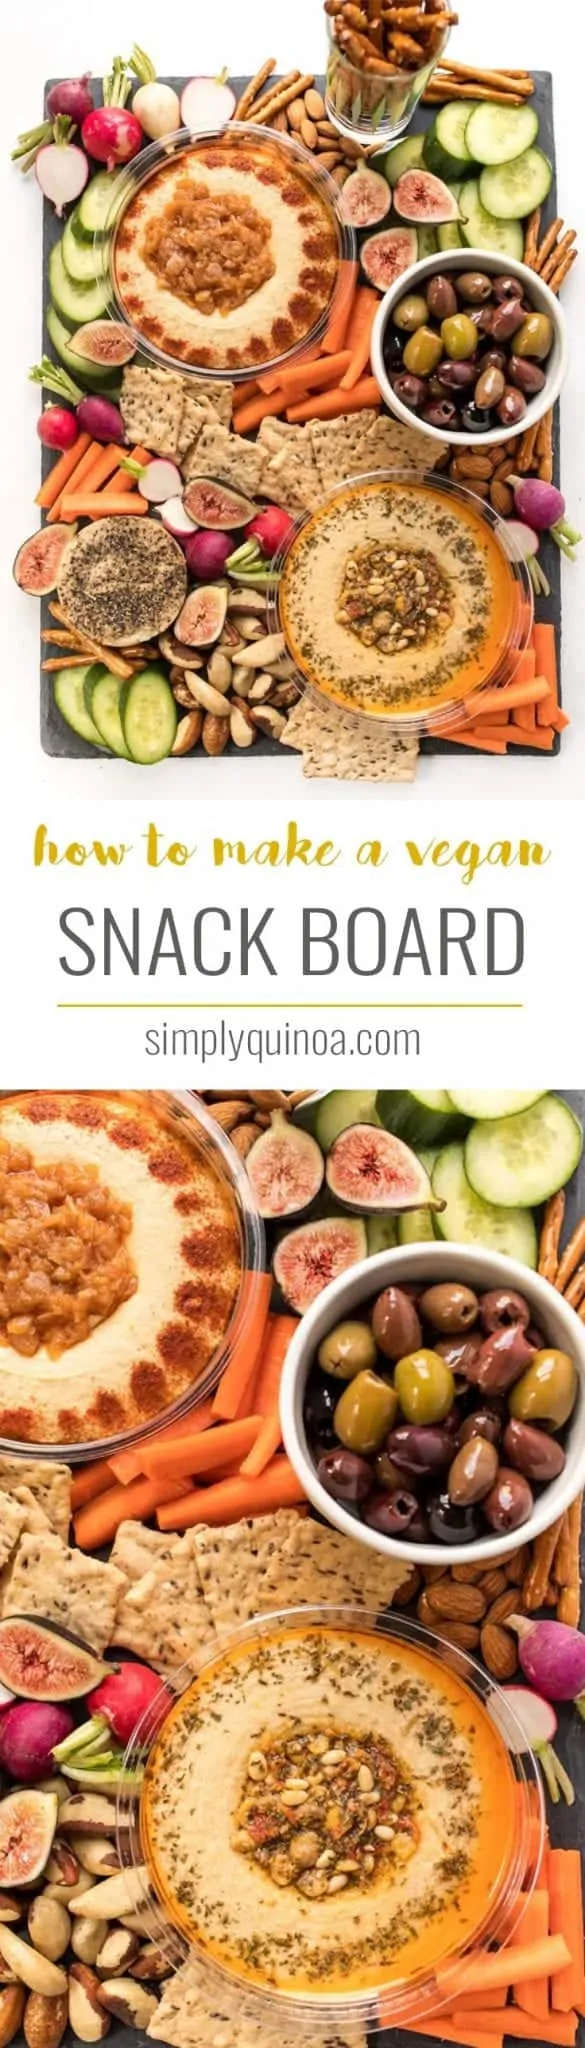 how to make a vegan snack board for Super Bowl